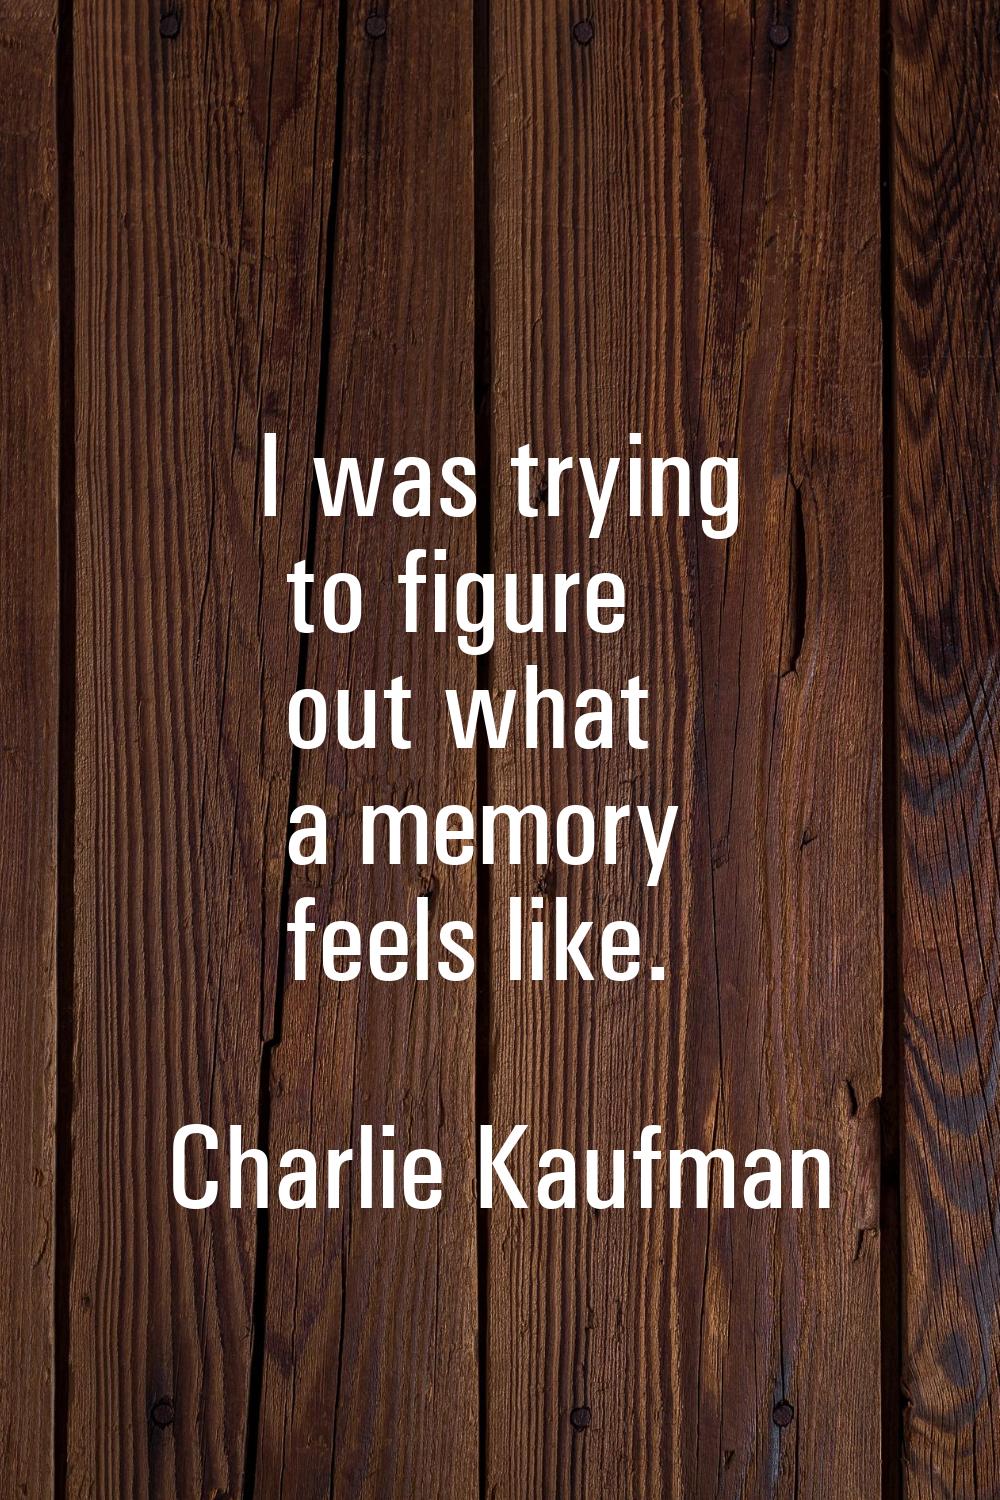 I was trying to figure out what a memory feels like.